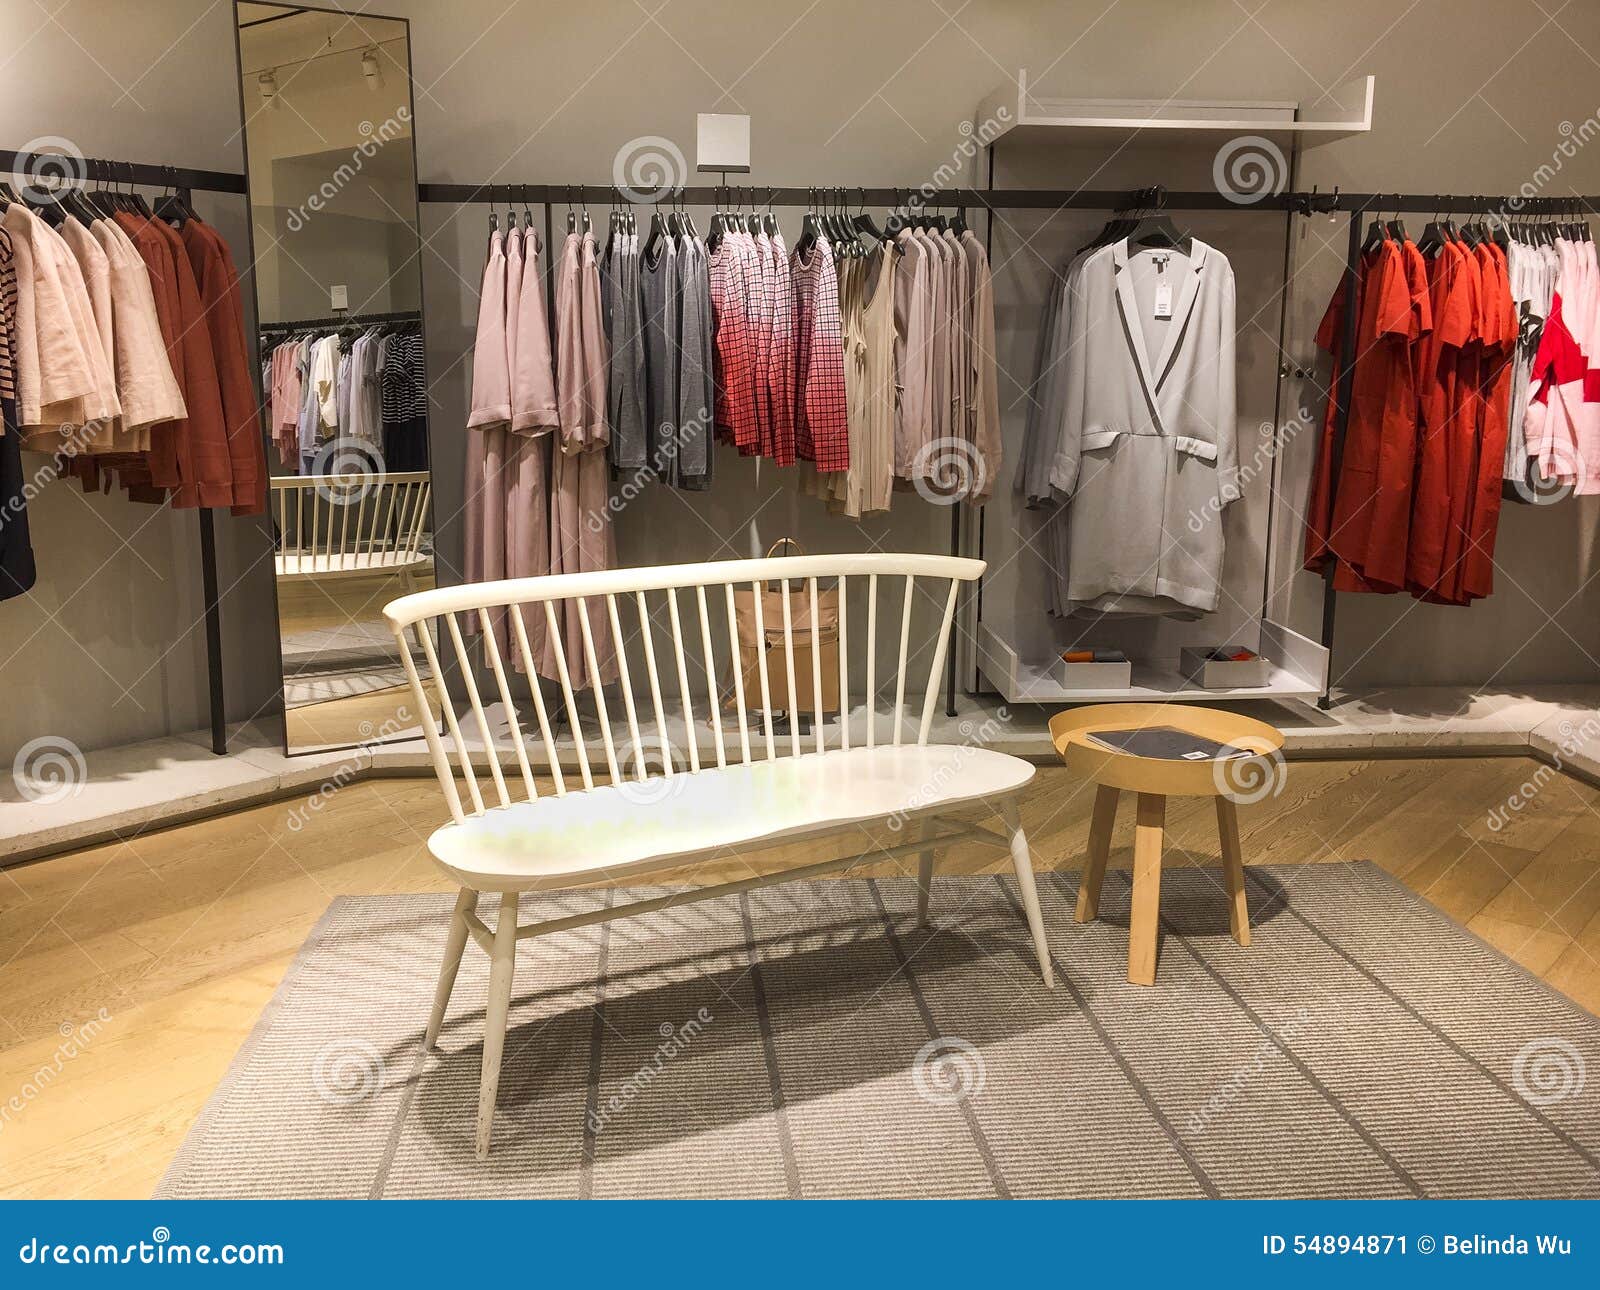 Lady fashion shop interior stock photo. Image of commercial